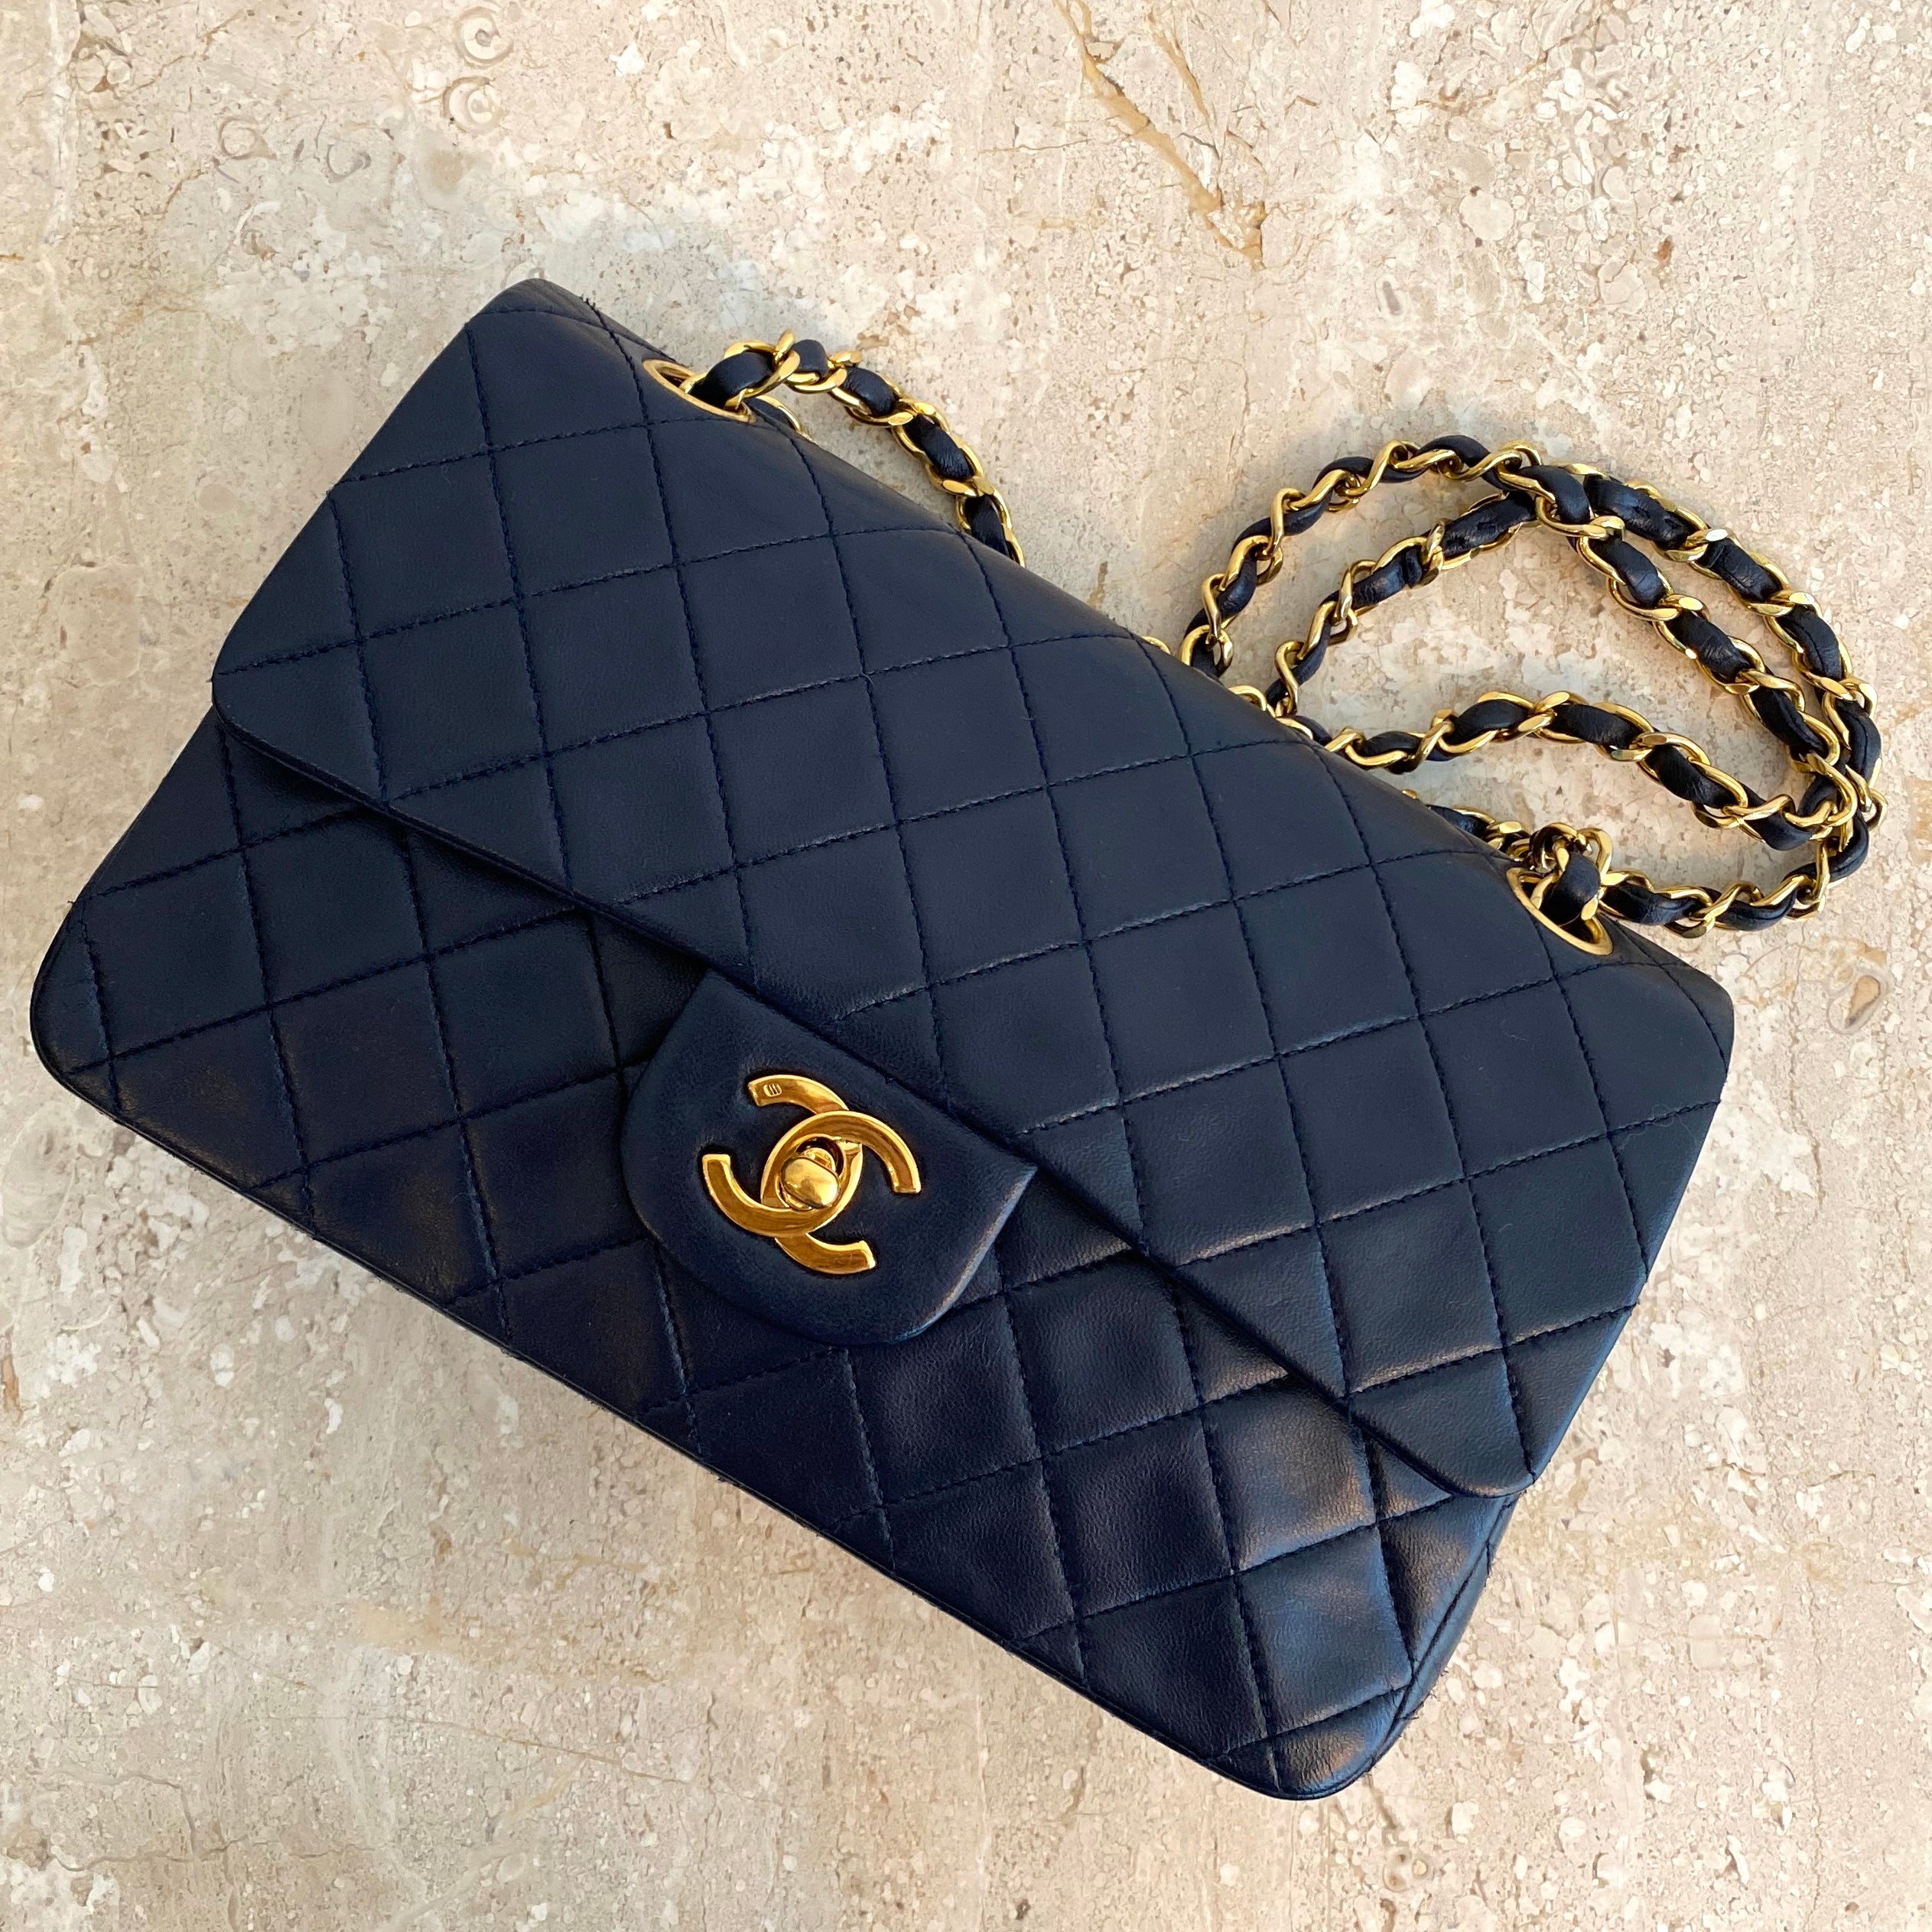 CARLY My Chanel Bag  Chanel bag Navy purse outfit Chanel bag classic